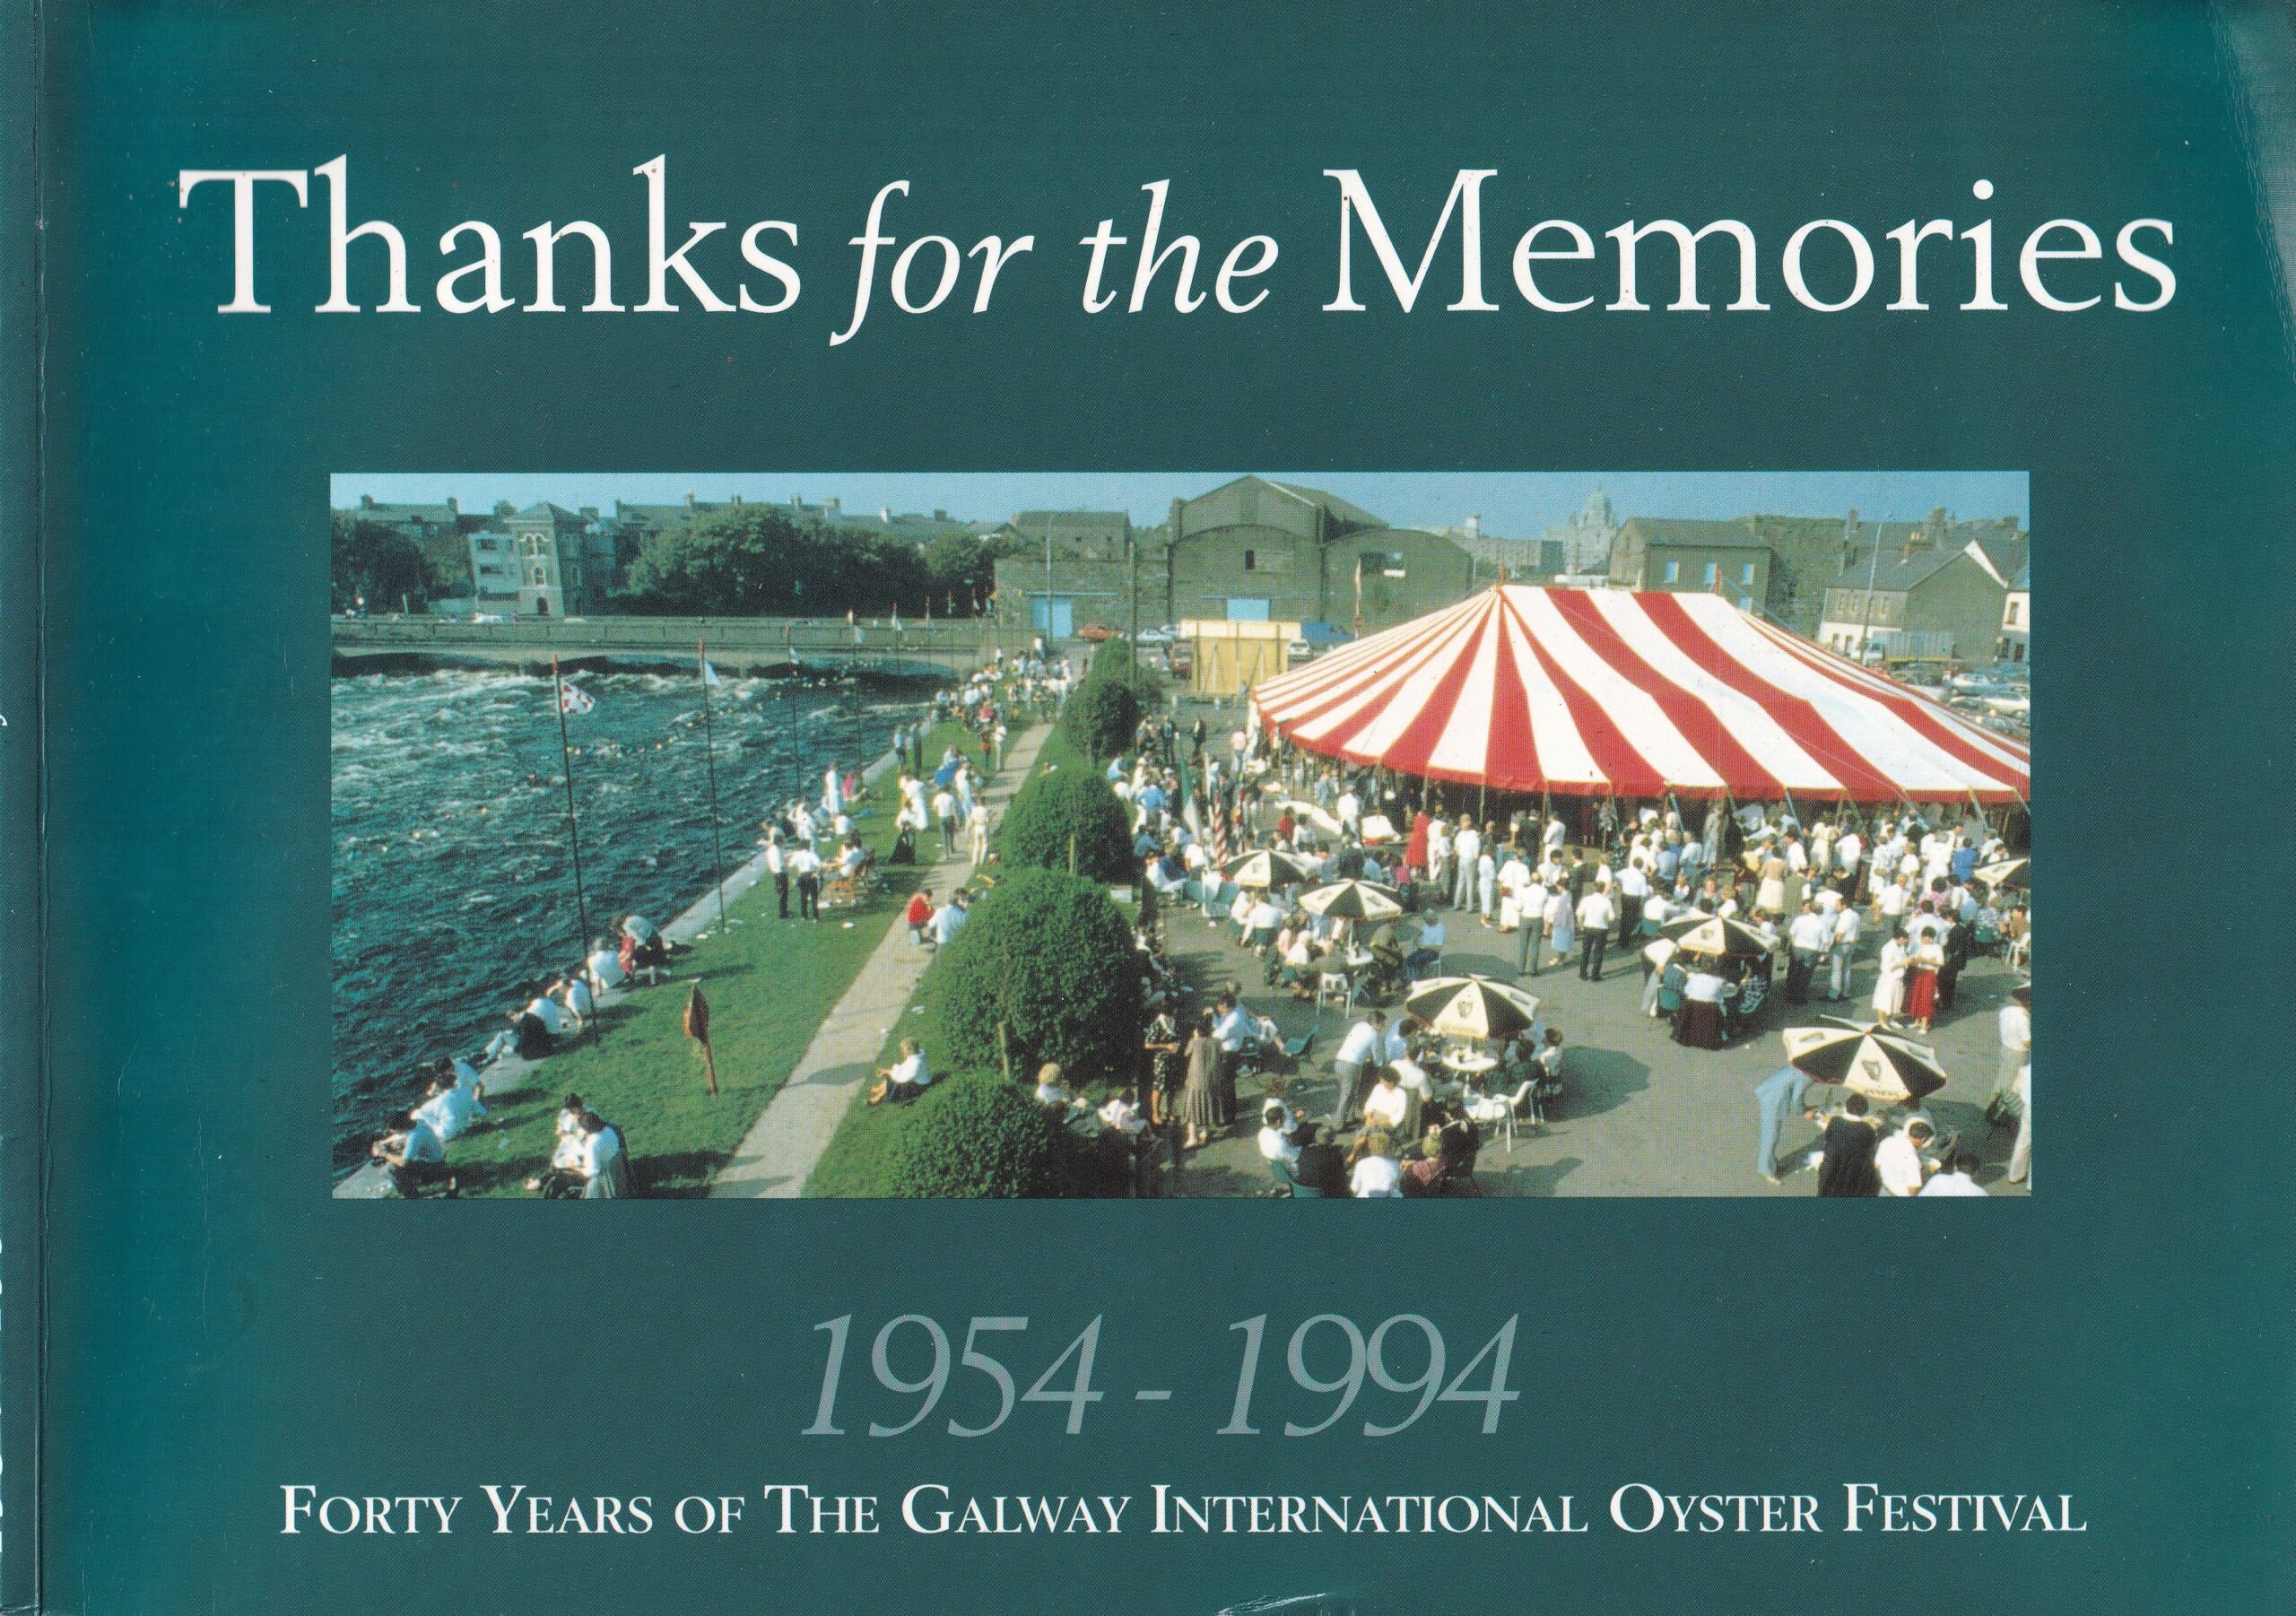 Thanks for the Memories: Forty Years of the Galway International Oyster Festival 1954-1994 | Paddy Ryan (ed.) | Charlie Byrne's